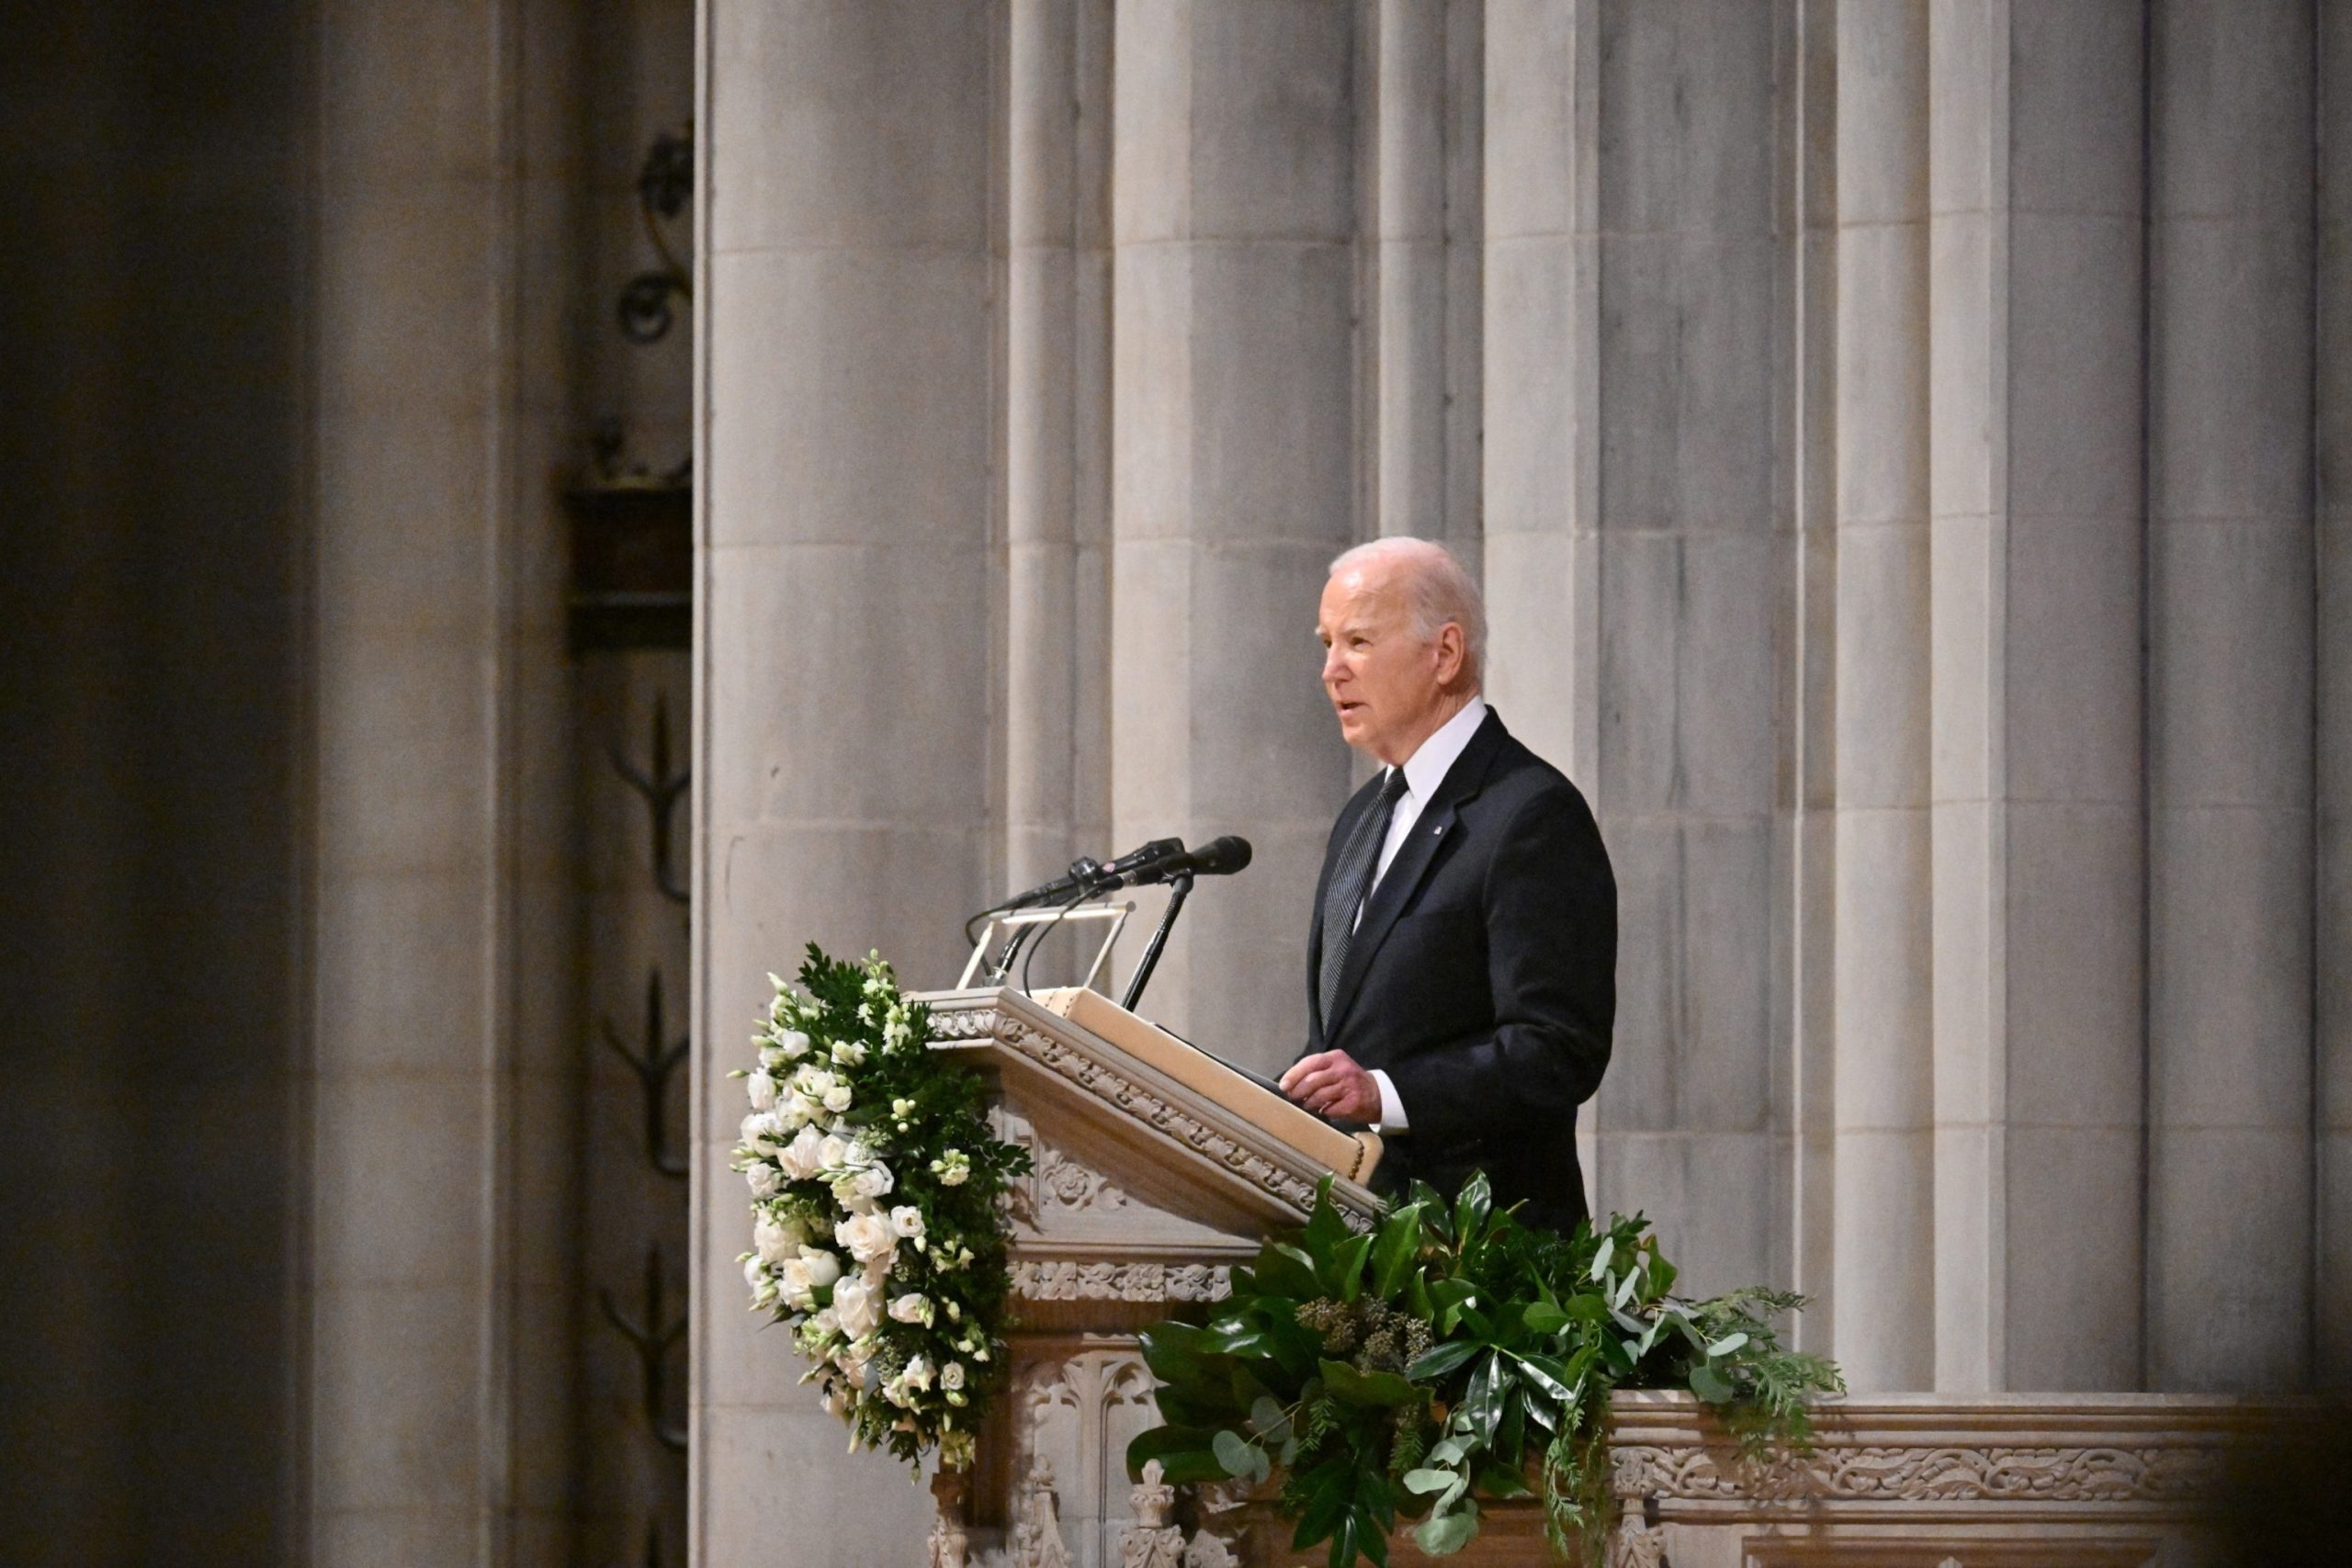 Biden Pays Tribute to Sandra Day O'Connor, the First Female Supreme Court Justice